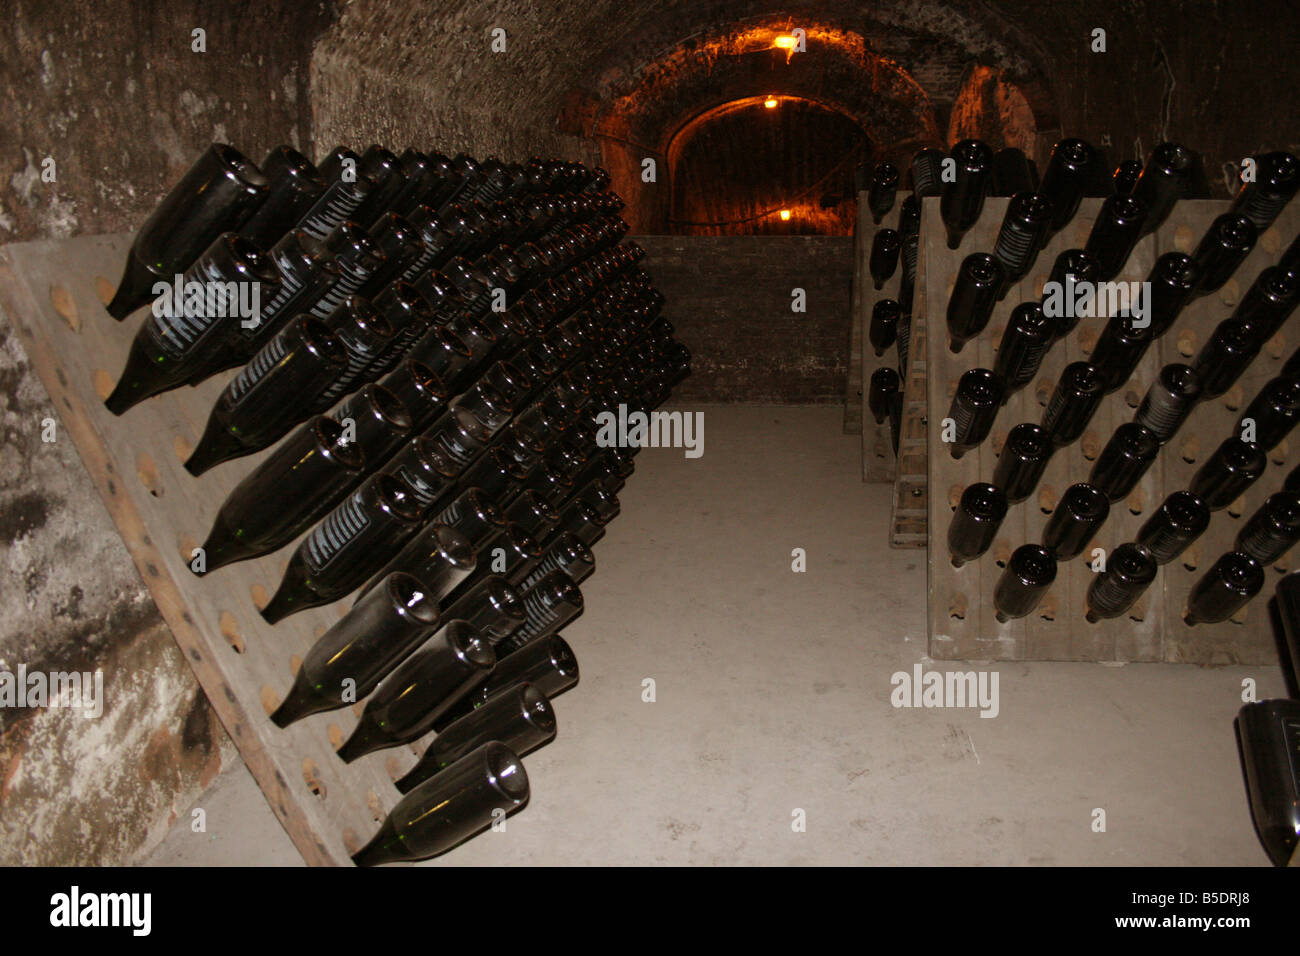 Champagne bottles in various sizes, Imperial, Moet et Chandon winery, LVMH  luxury goods group, Louis Vuitton Moet Hennessy Stock Photo - Alamy